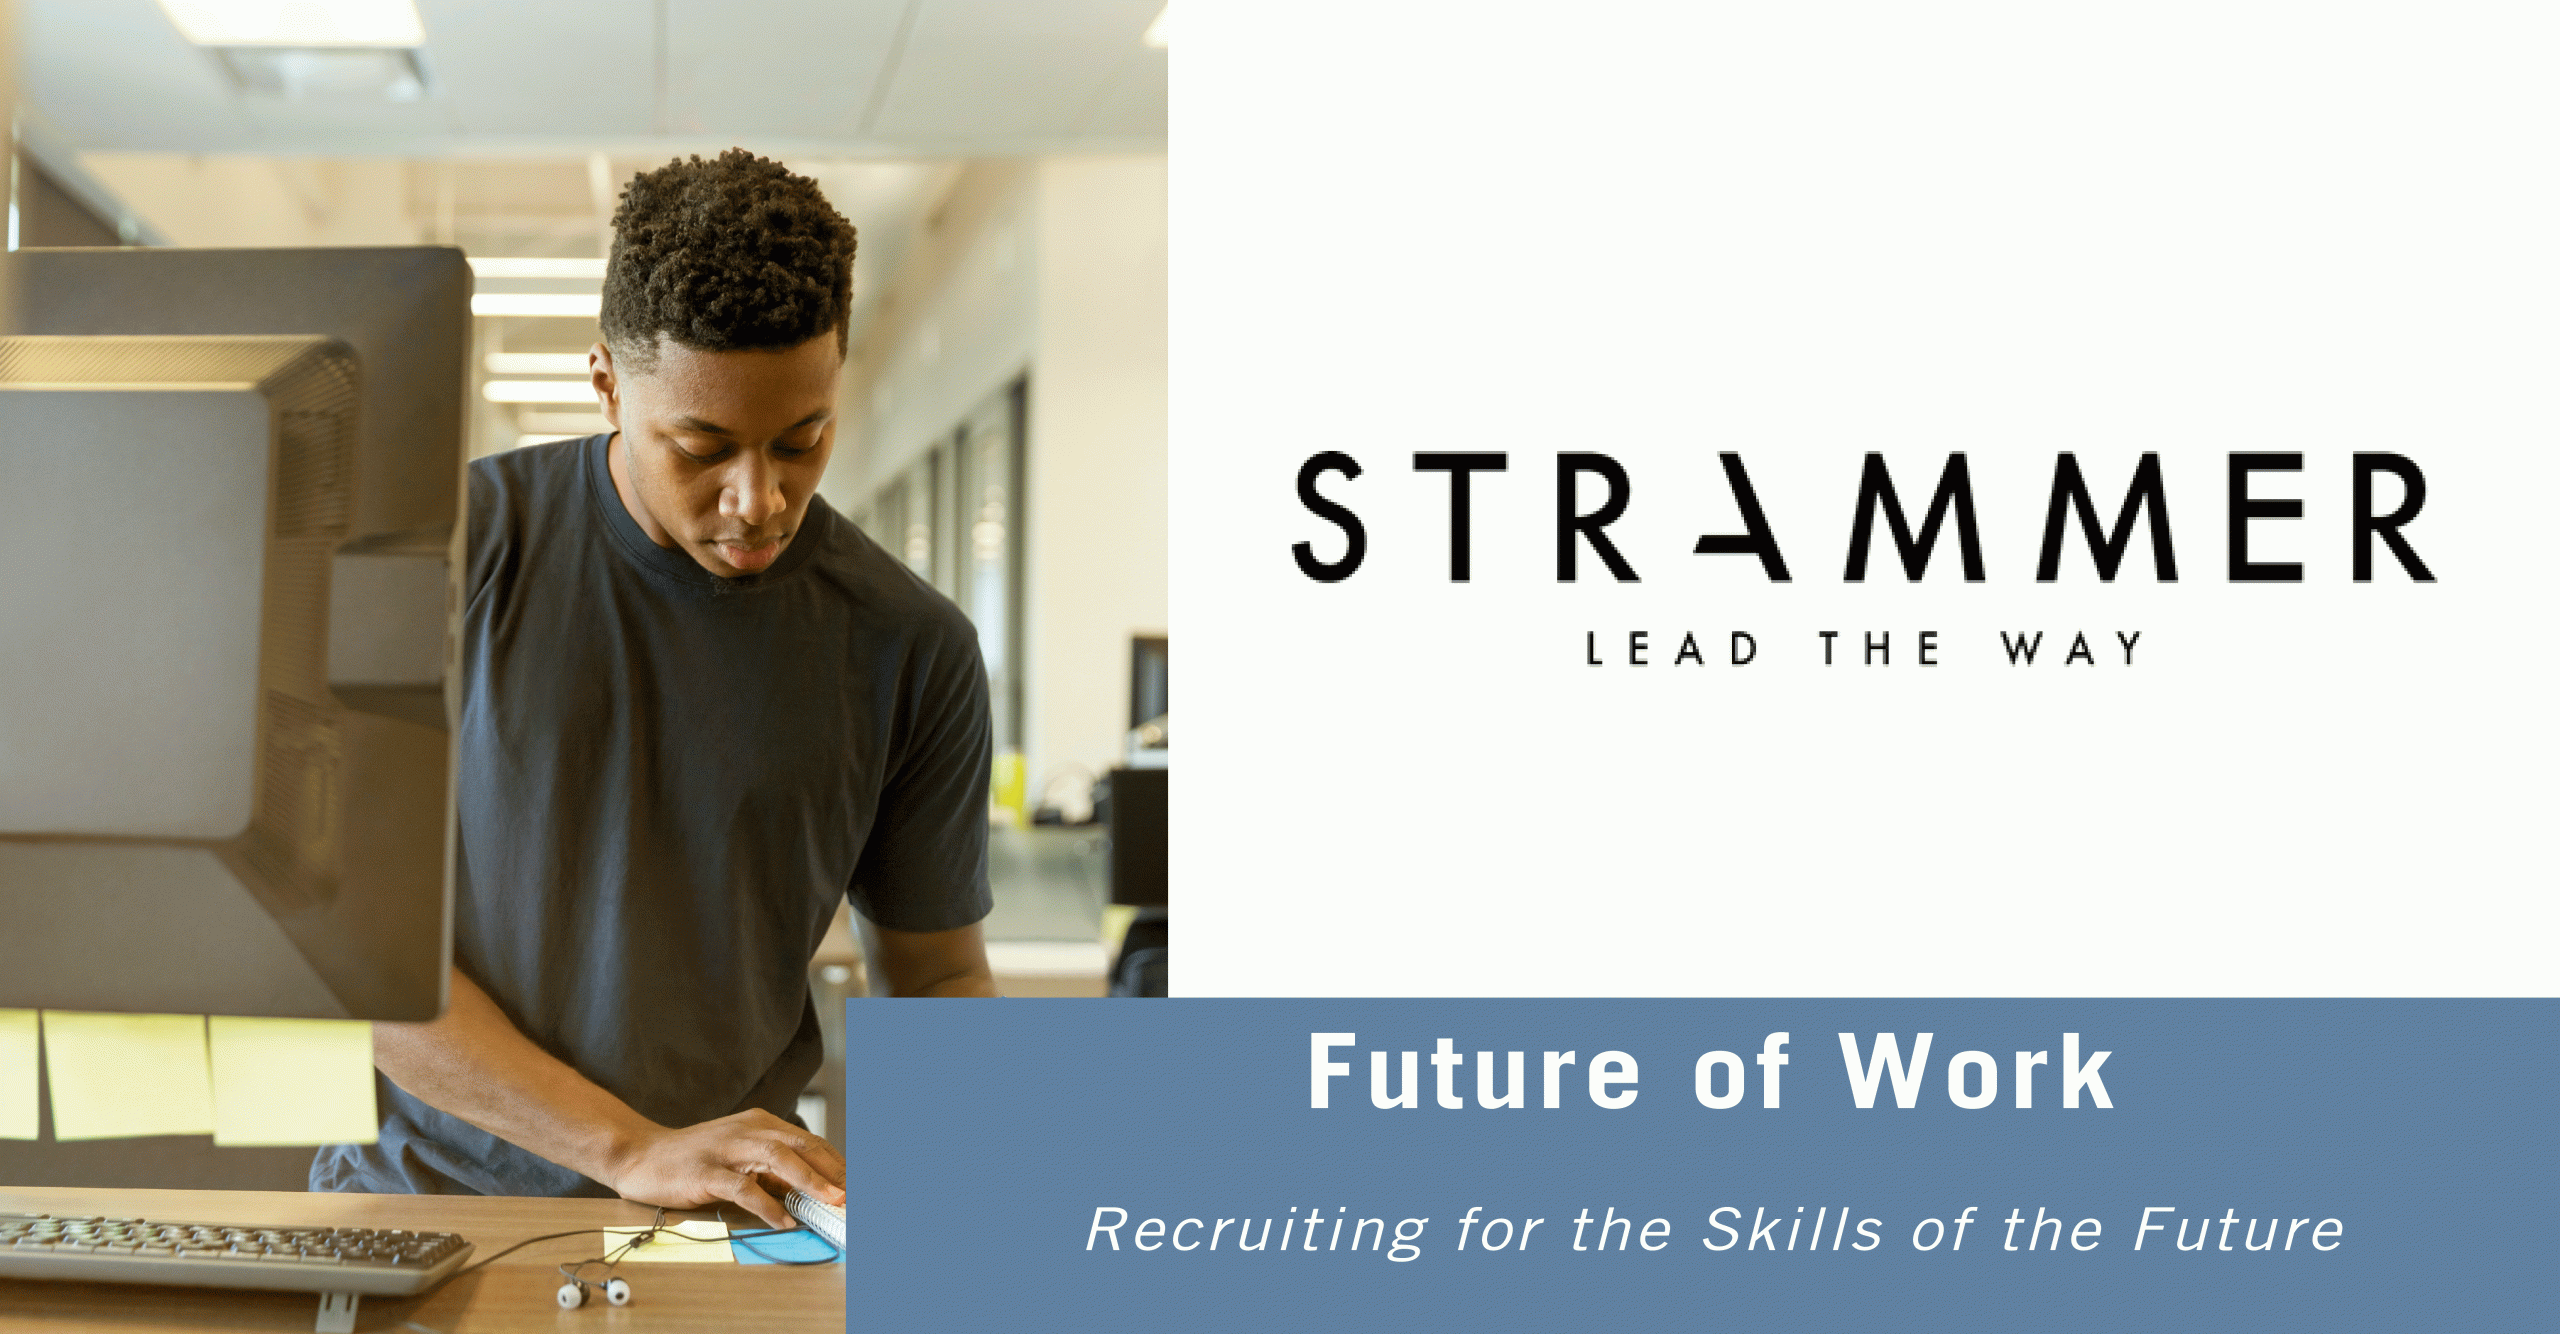 Recruiting for the Skills of the Future